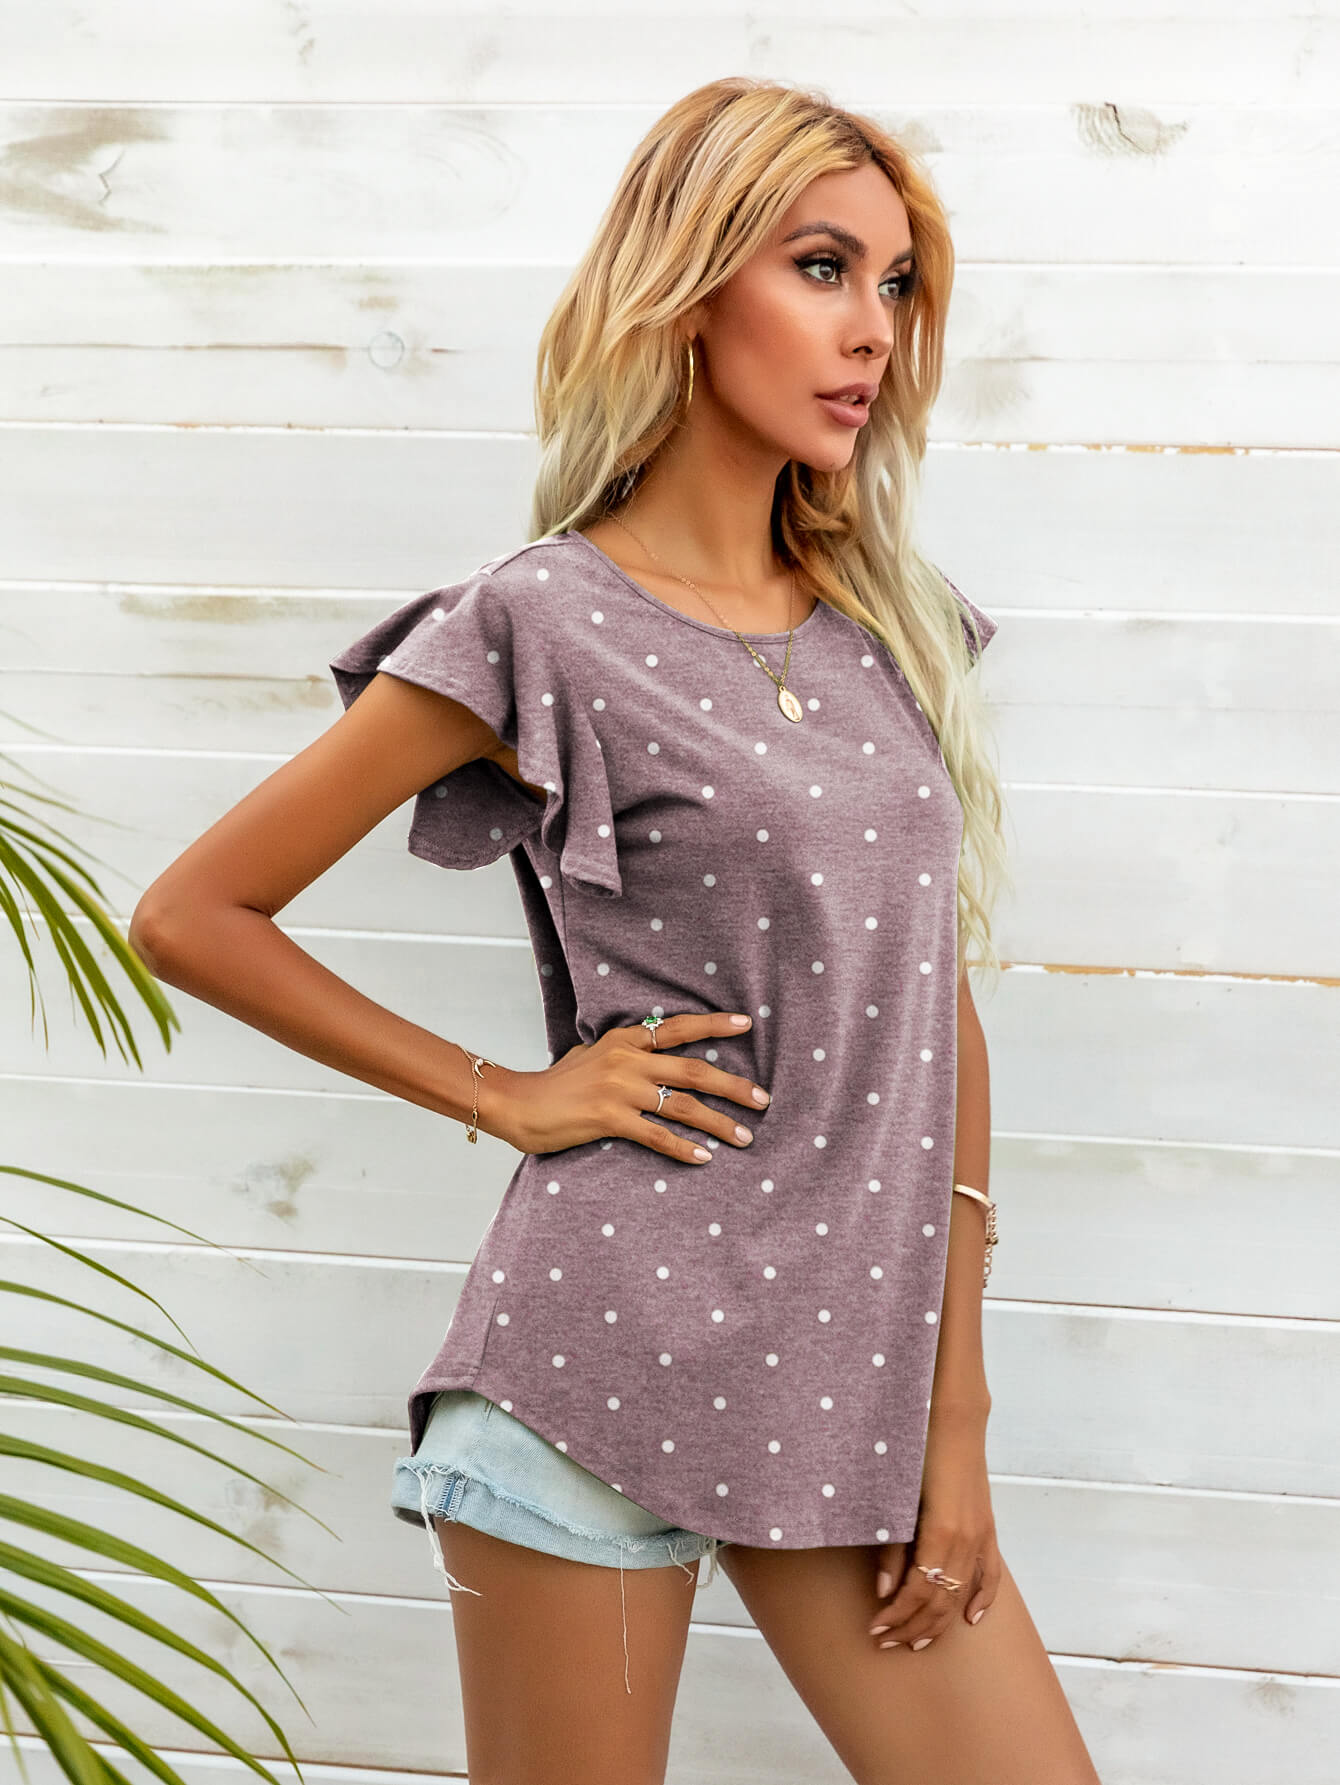 Round Neck Butterfly Sleeve Top - choice of prints